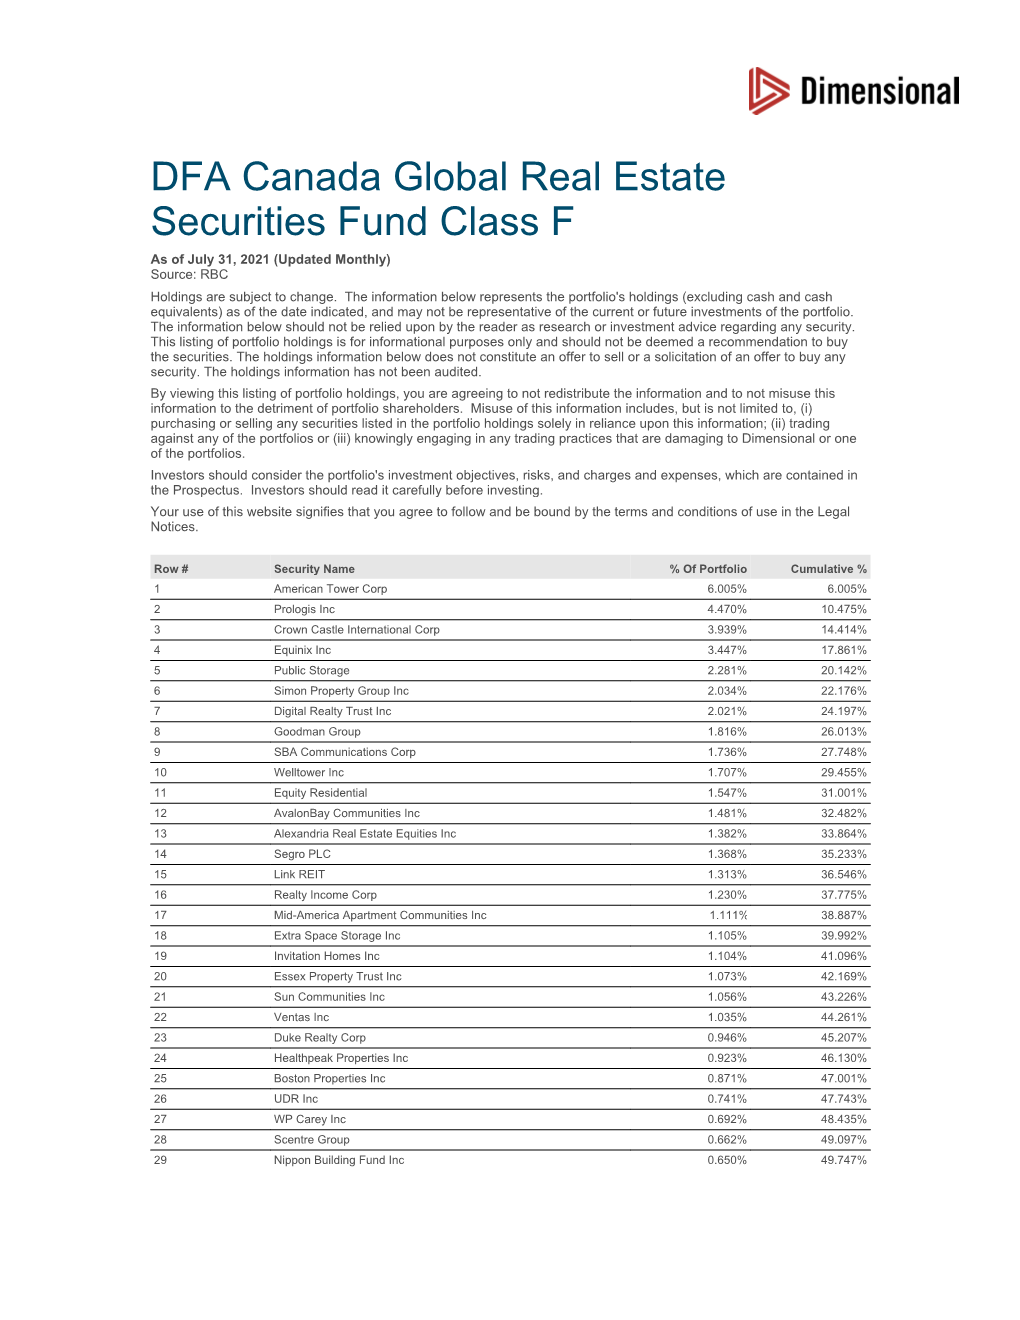 DFA Canada Global Real Estate Securities Fund Class F As of July 31, 2021 (Updated Monthly) Source: RBC Holdings Are Subject to Change